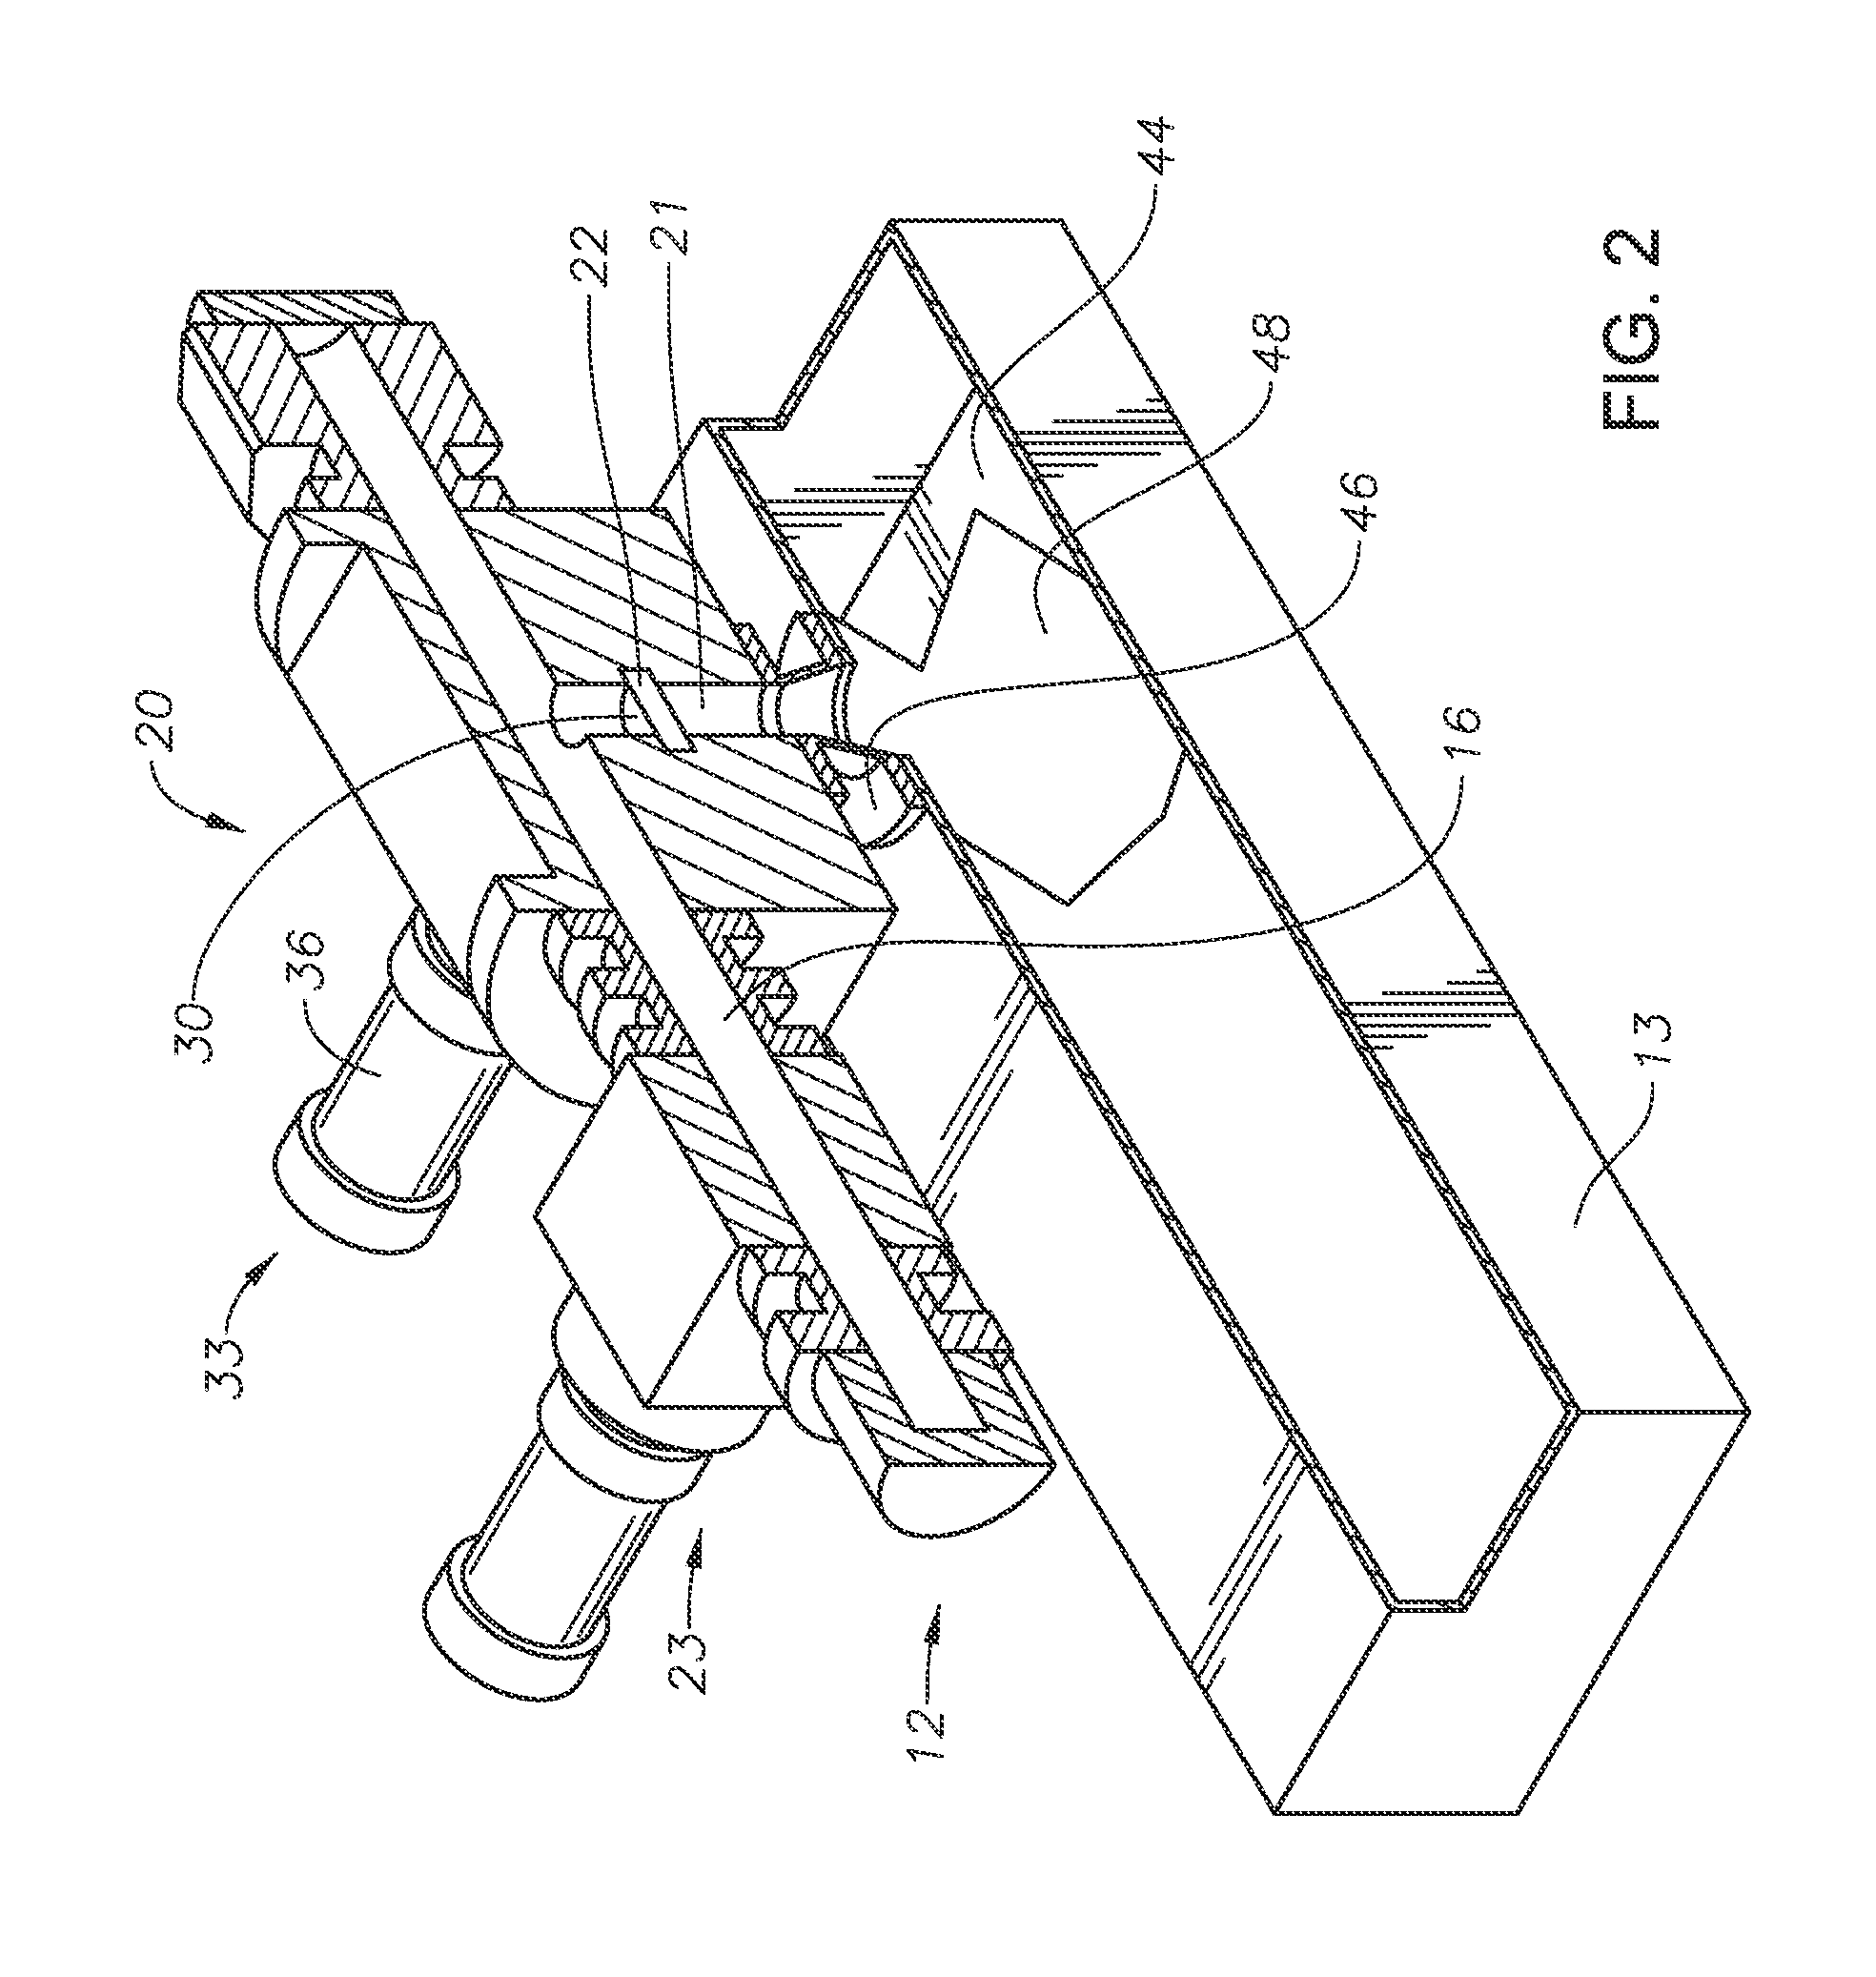 Safety Systems for Isolating Overpressure During Pressurized Fluid Operations